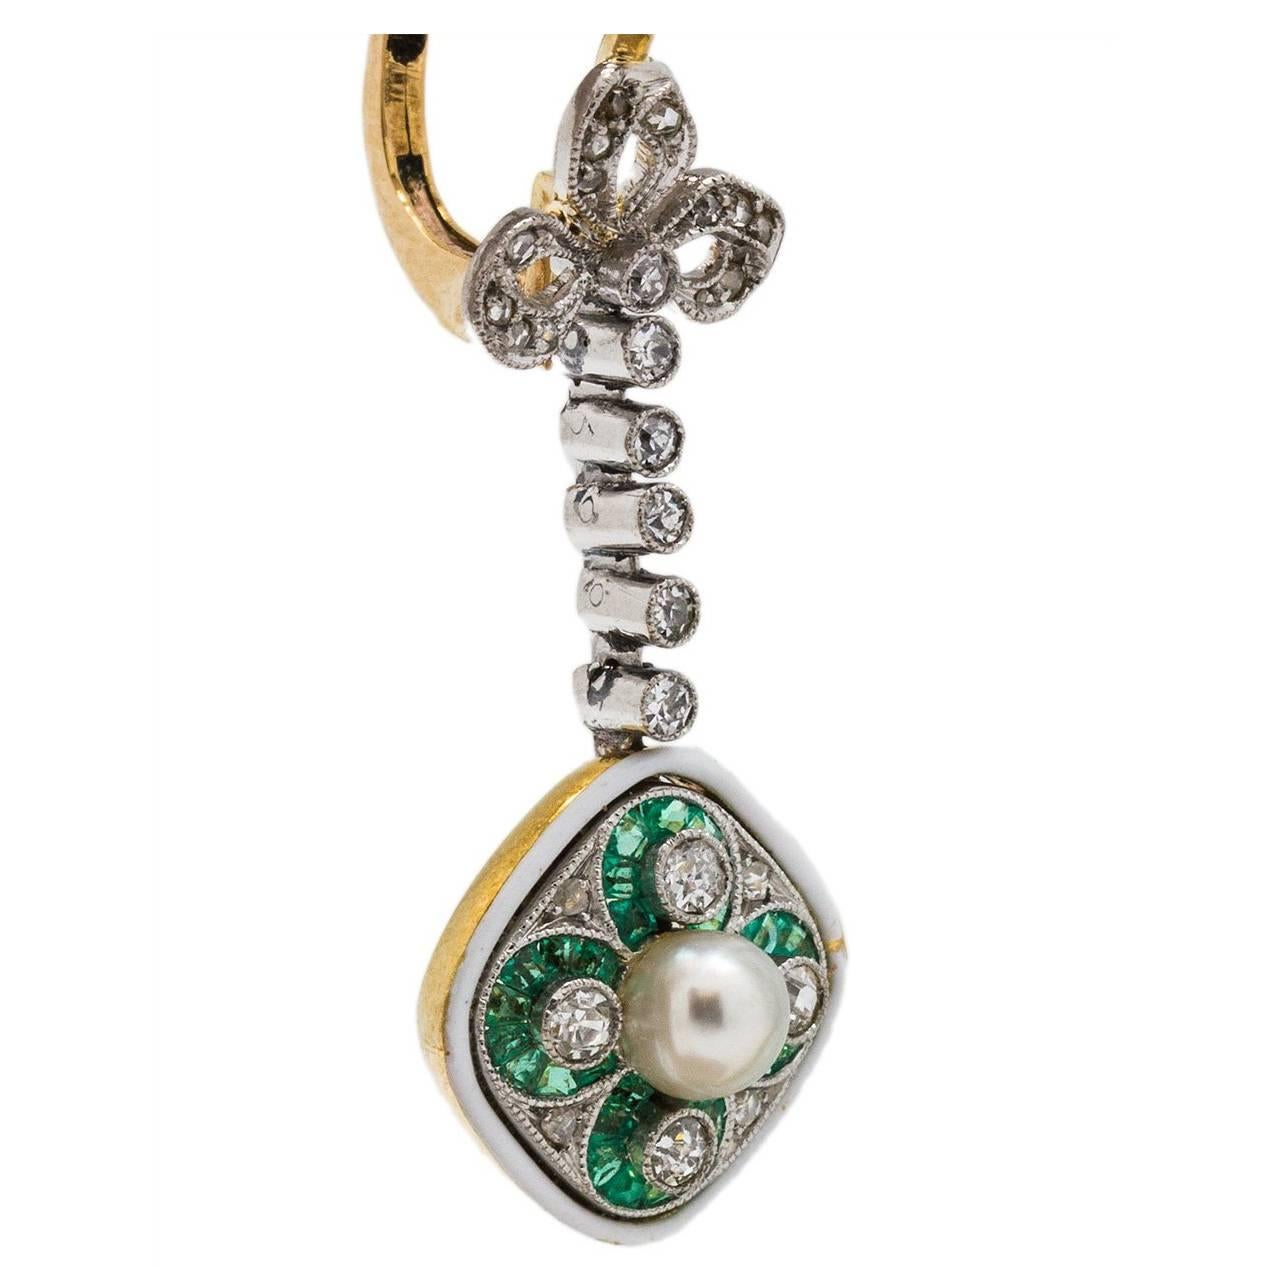 Romantic Edwardian pearl, emerald and diamond dangle earrings set in platinum and 18k yellow gold, with whimsical bow tie motif. These lovely earrings are set with a combination of Old European and single cut diamonds, G- H/SI1-I1. Total diamond